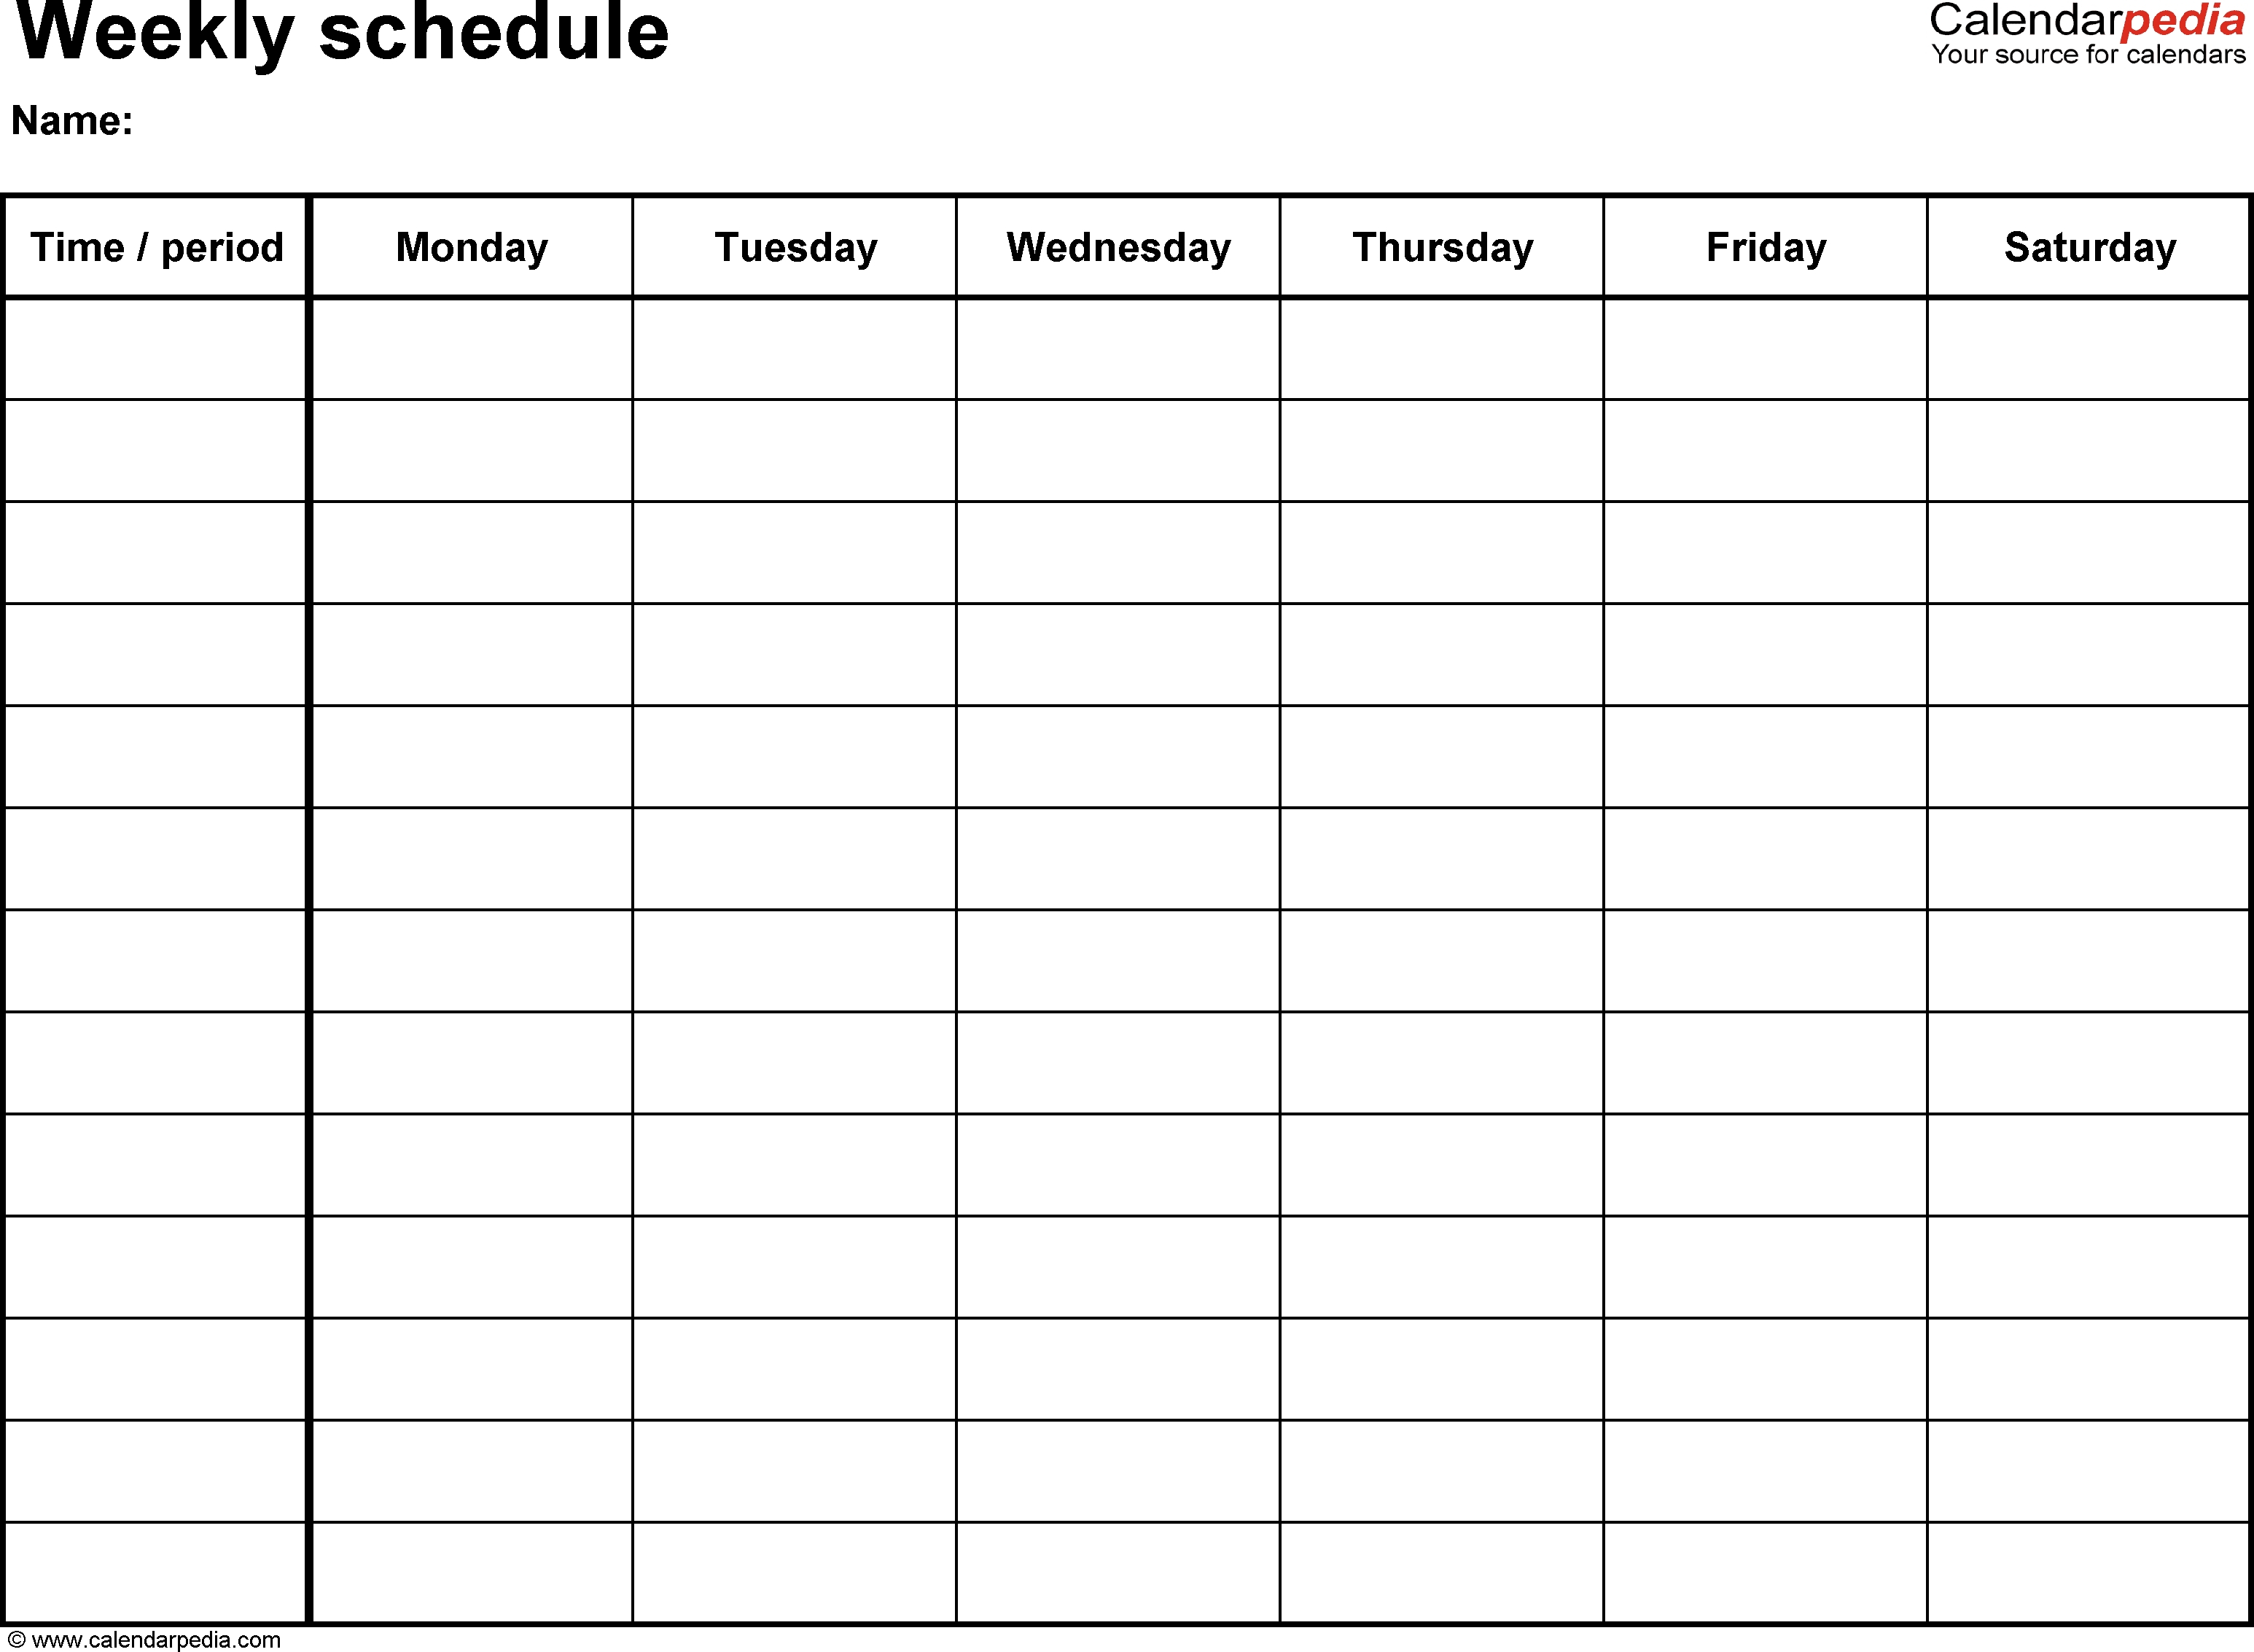 Free Weekly Schedule Templates For Word – 18 Templatesblank with Fill In Blank Calendar